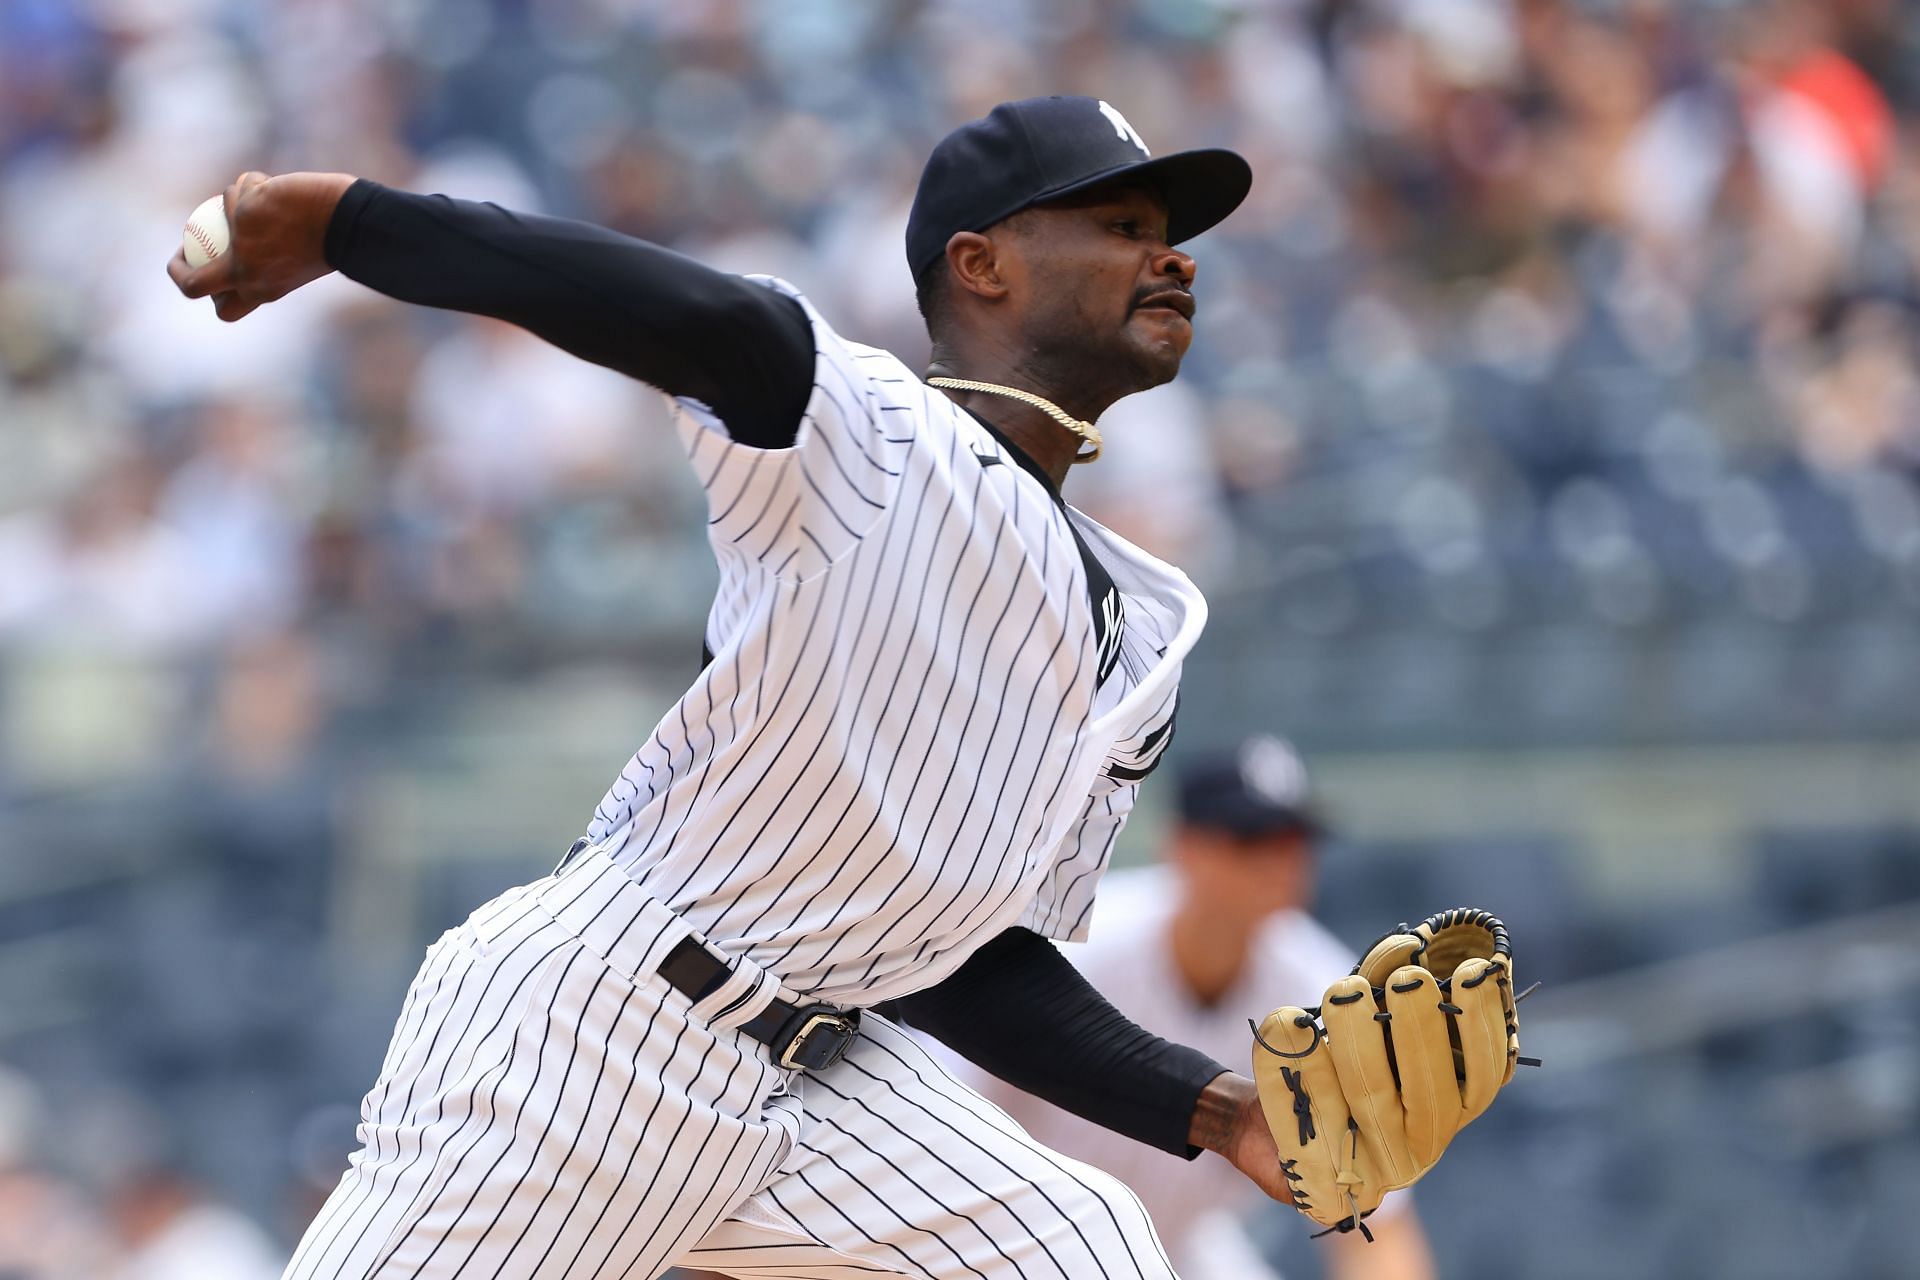 Domingo German pitches during an Oakland Athletics v New York Yankees game.